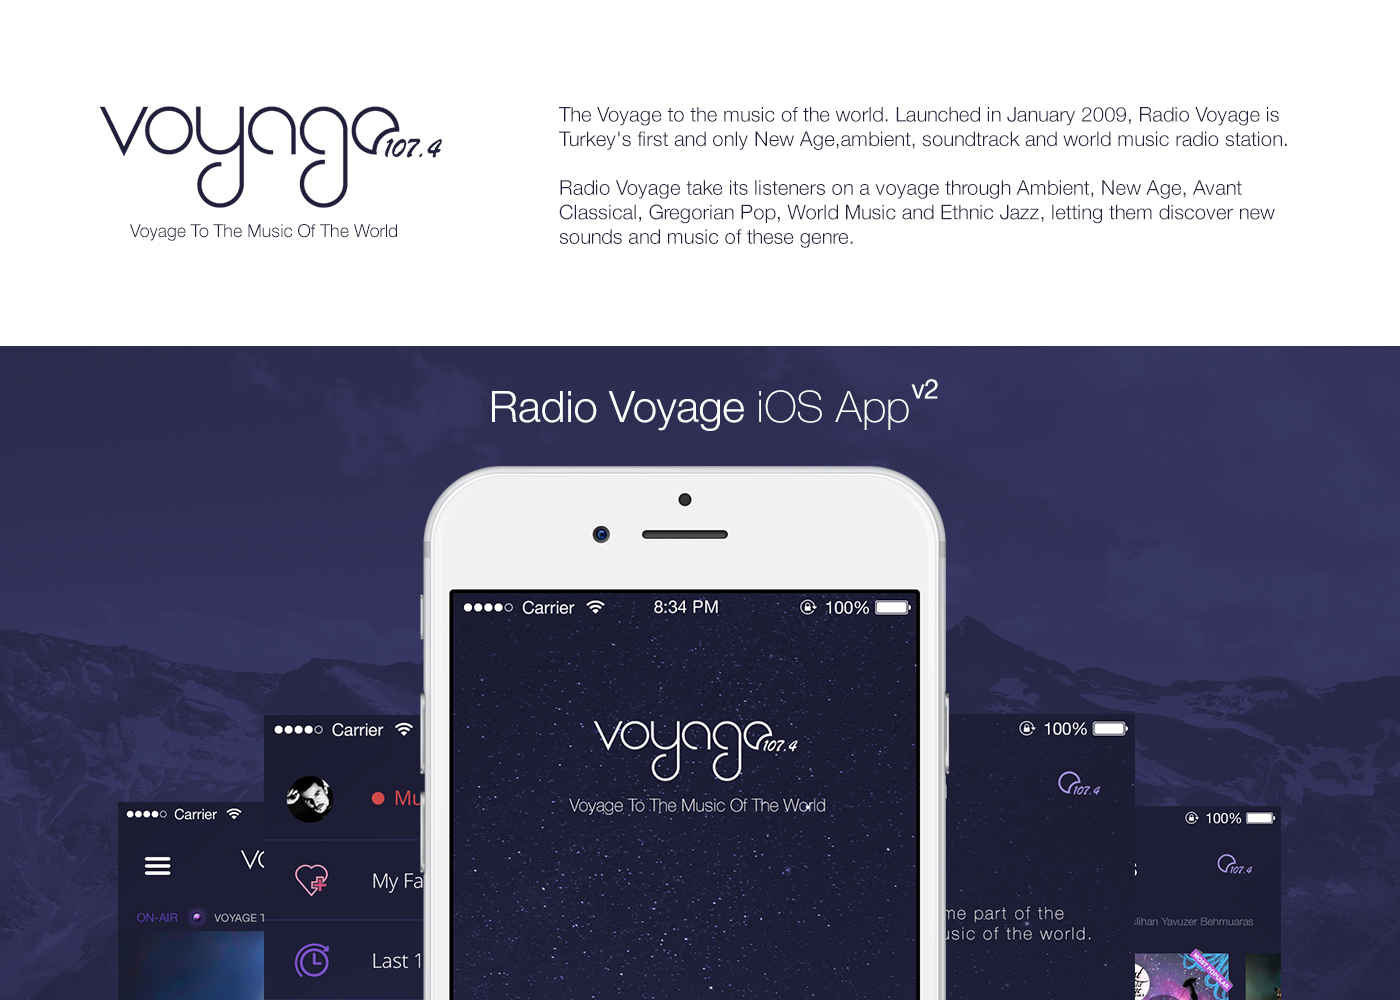 concept iphone Radio iphone app UI Mobile app Interface user interface user experience Guide